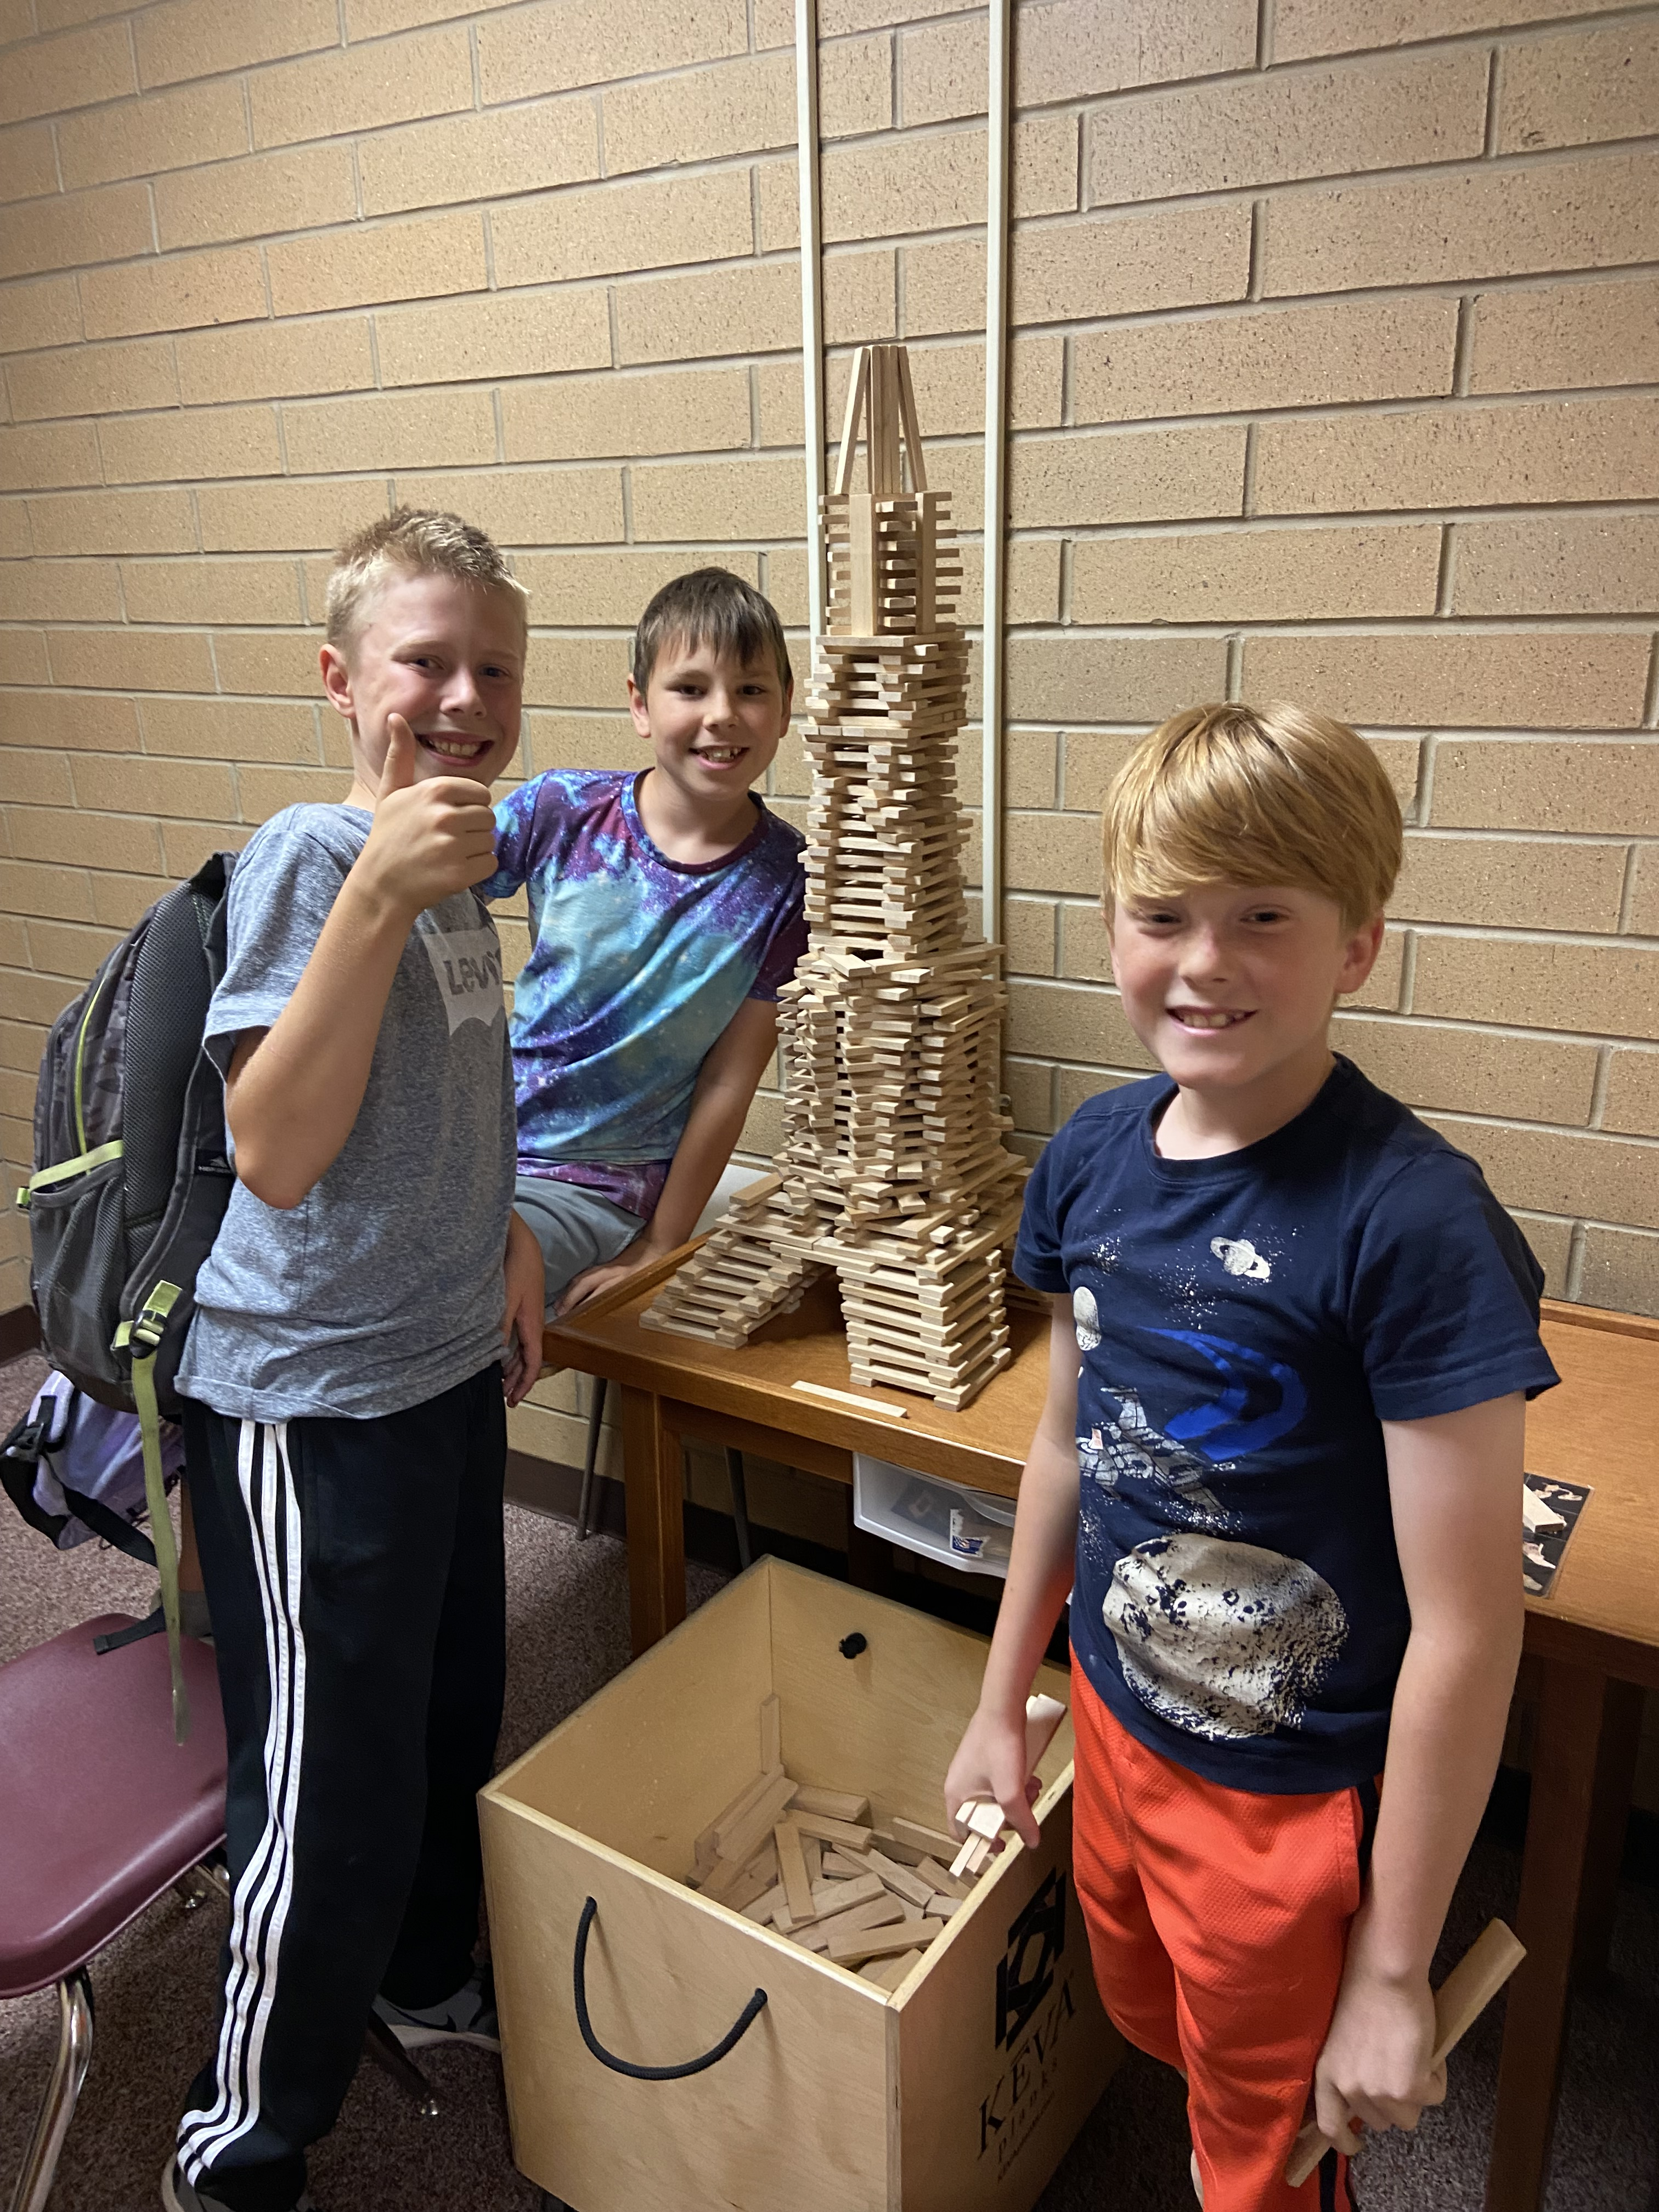 Students use blocks to recreate the Eiffel Tower